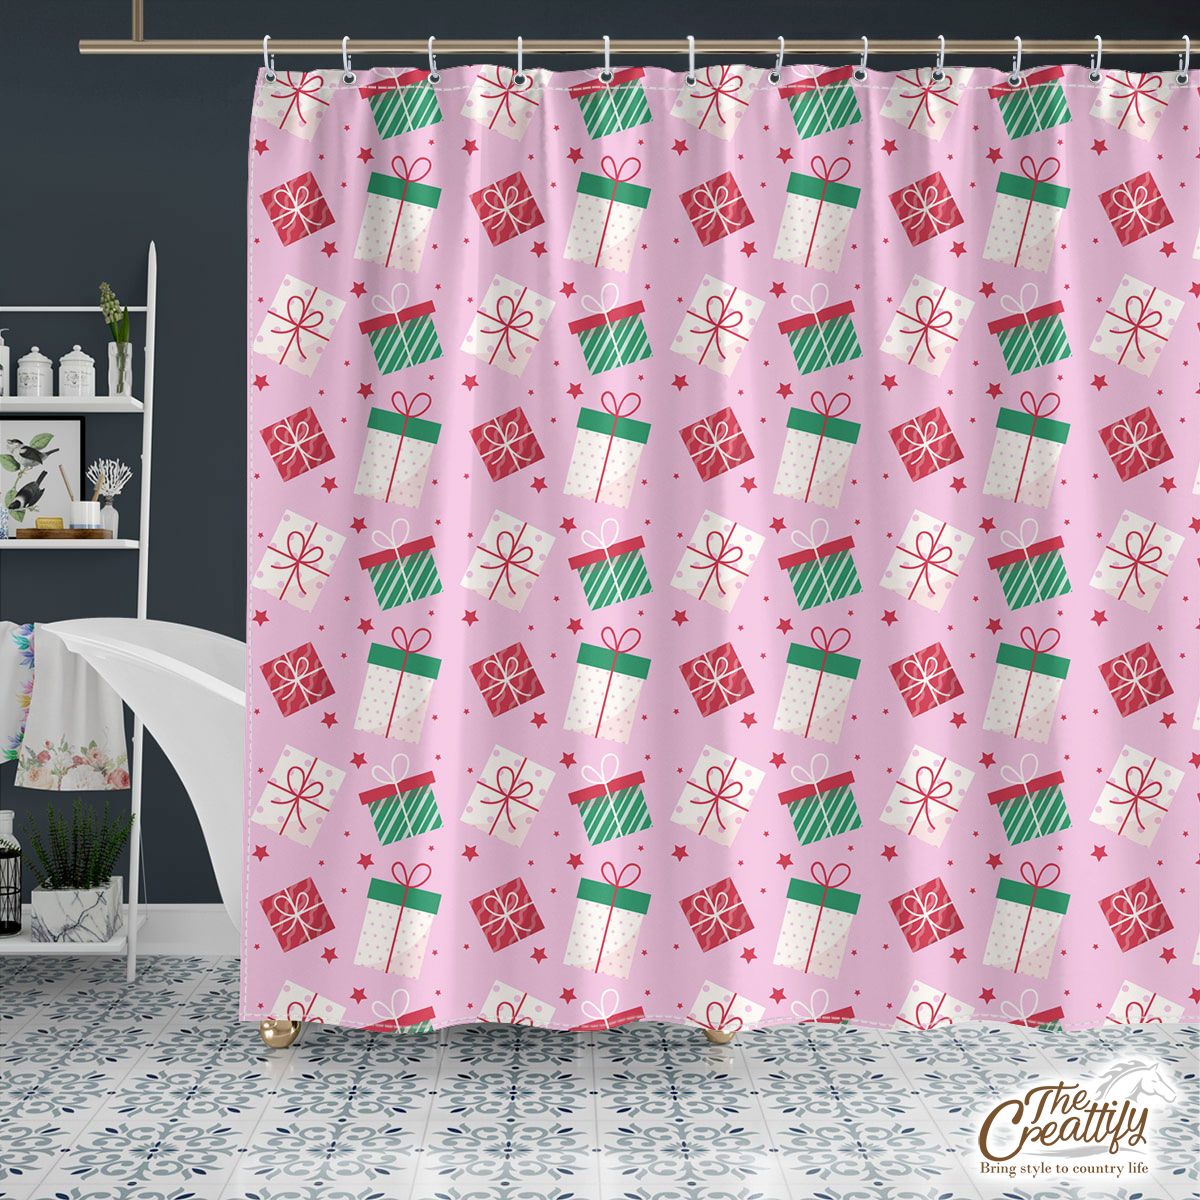 Red Green And White Christmas Gift On Pink Background Shower Curtain